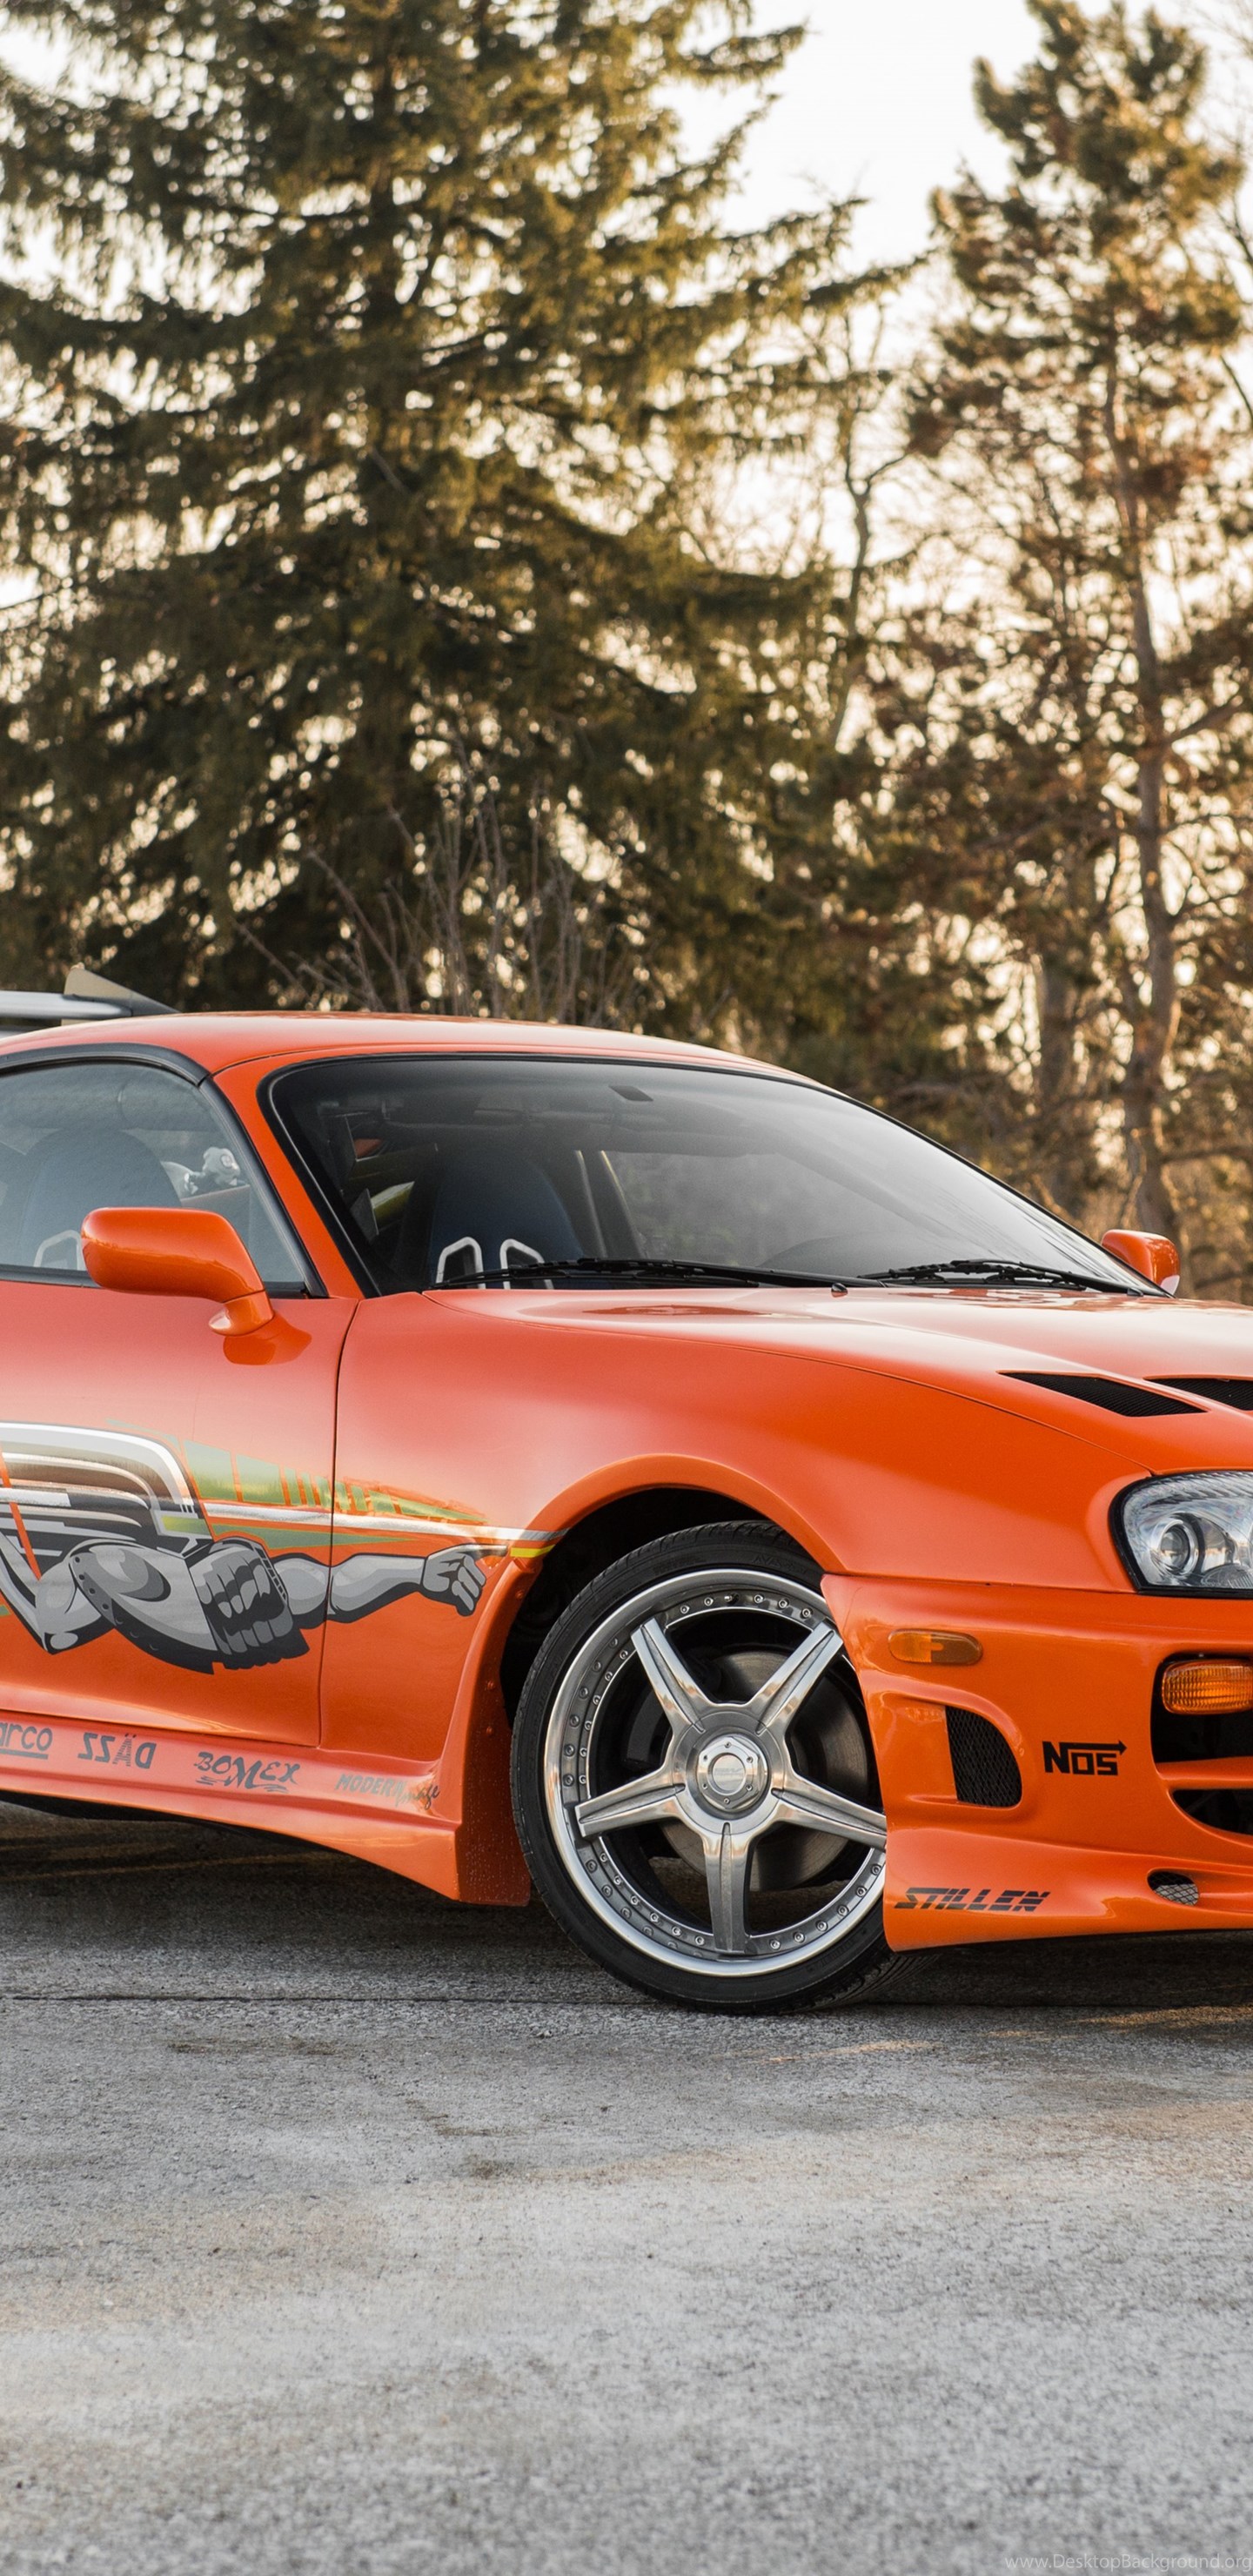 Toyota Supra Fast And Furious Hot Wheels Image Desktop Background